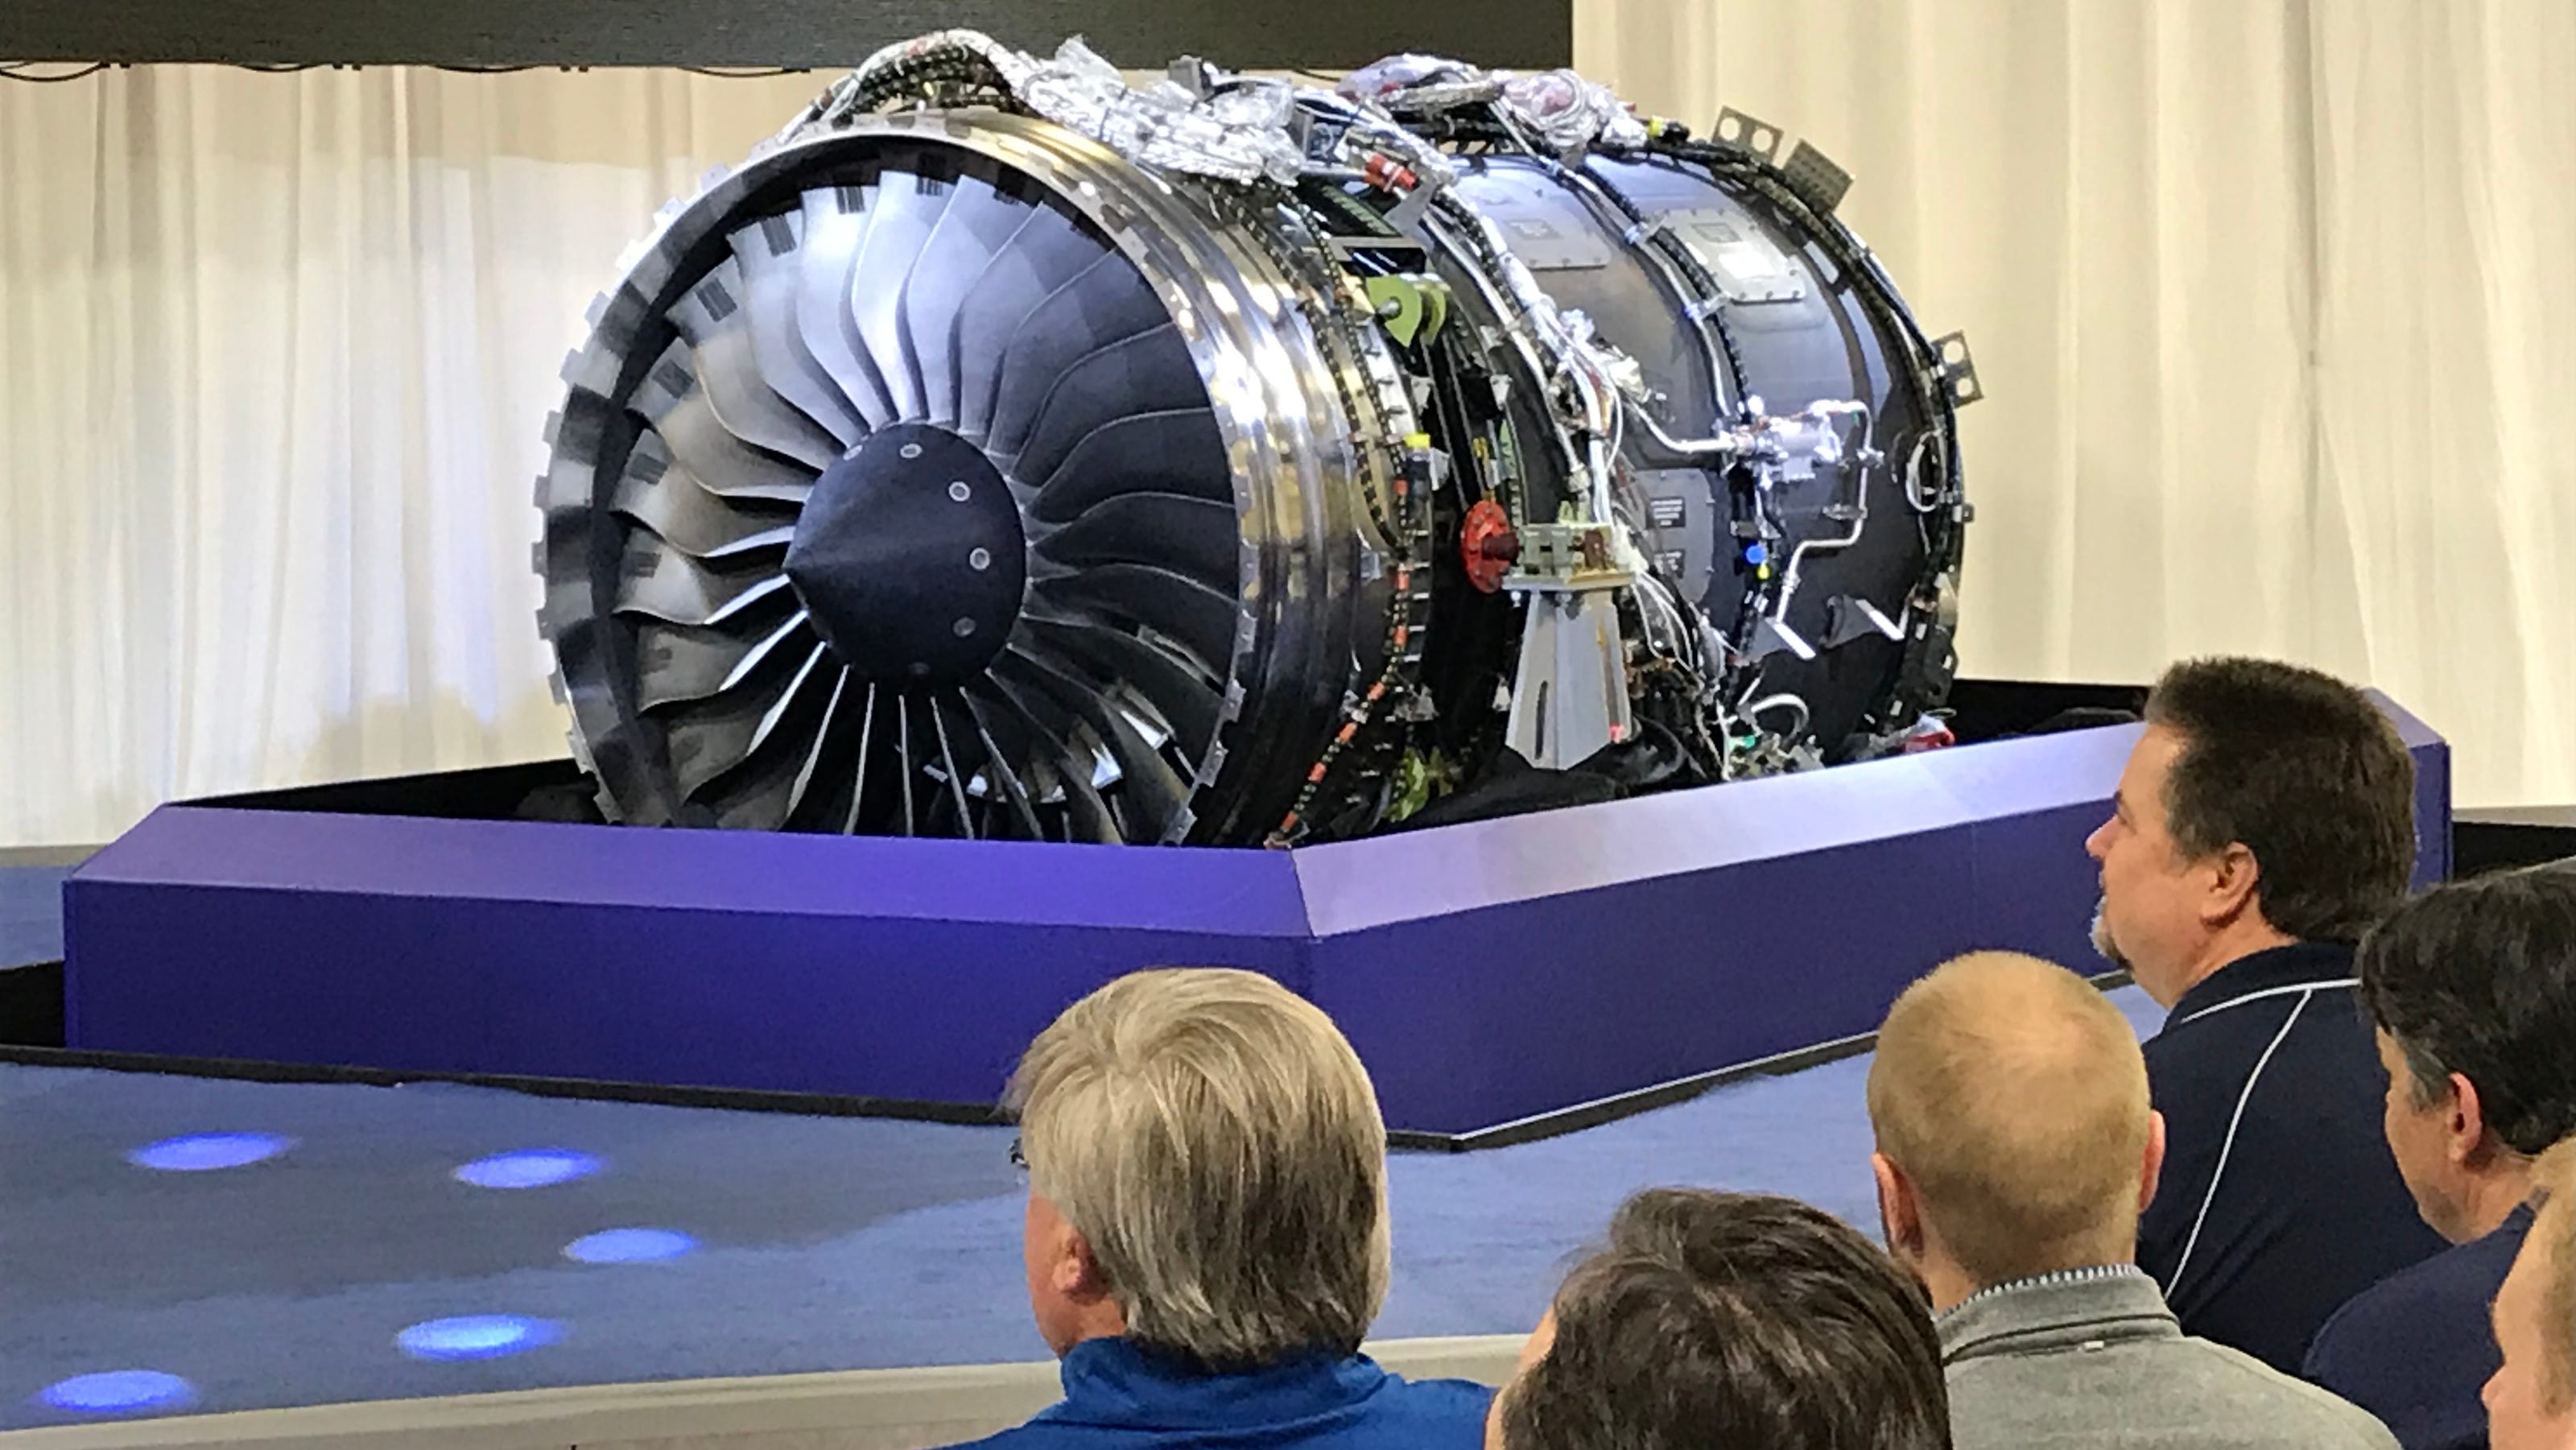 Indianapolis could land 150 assembly line new jobs at Rolls-Royce